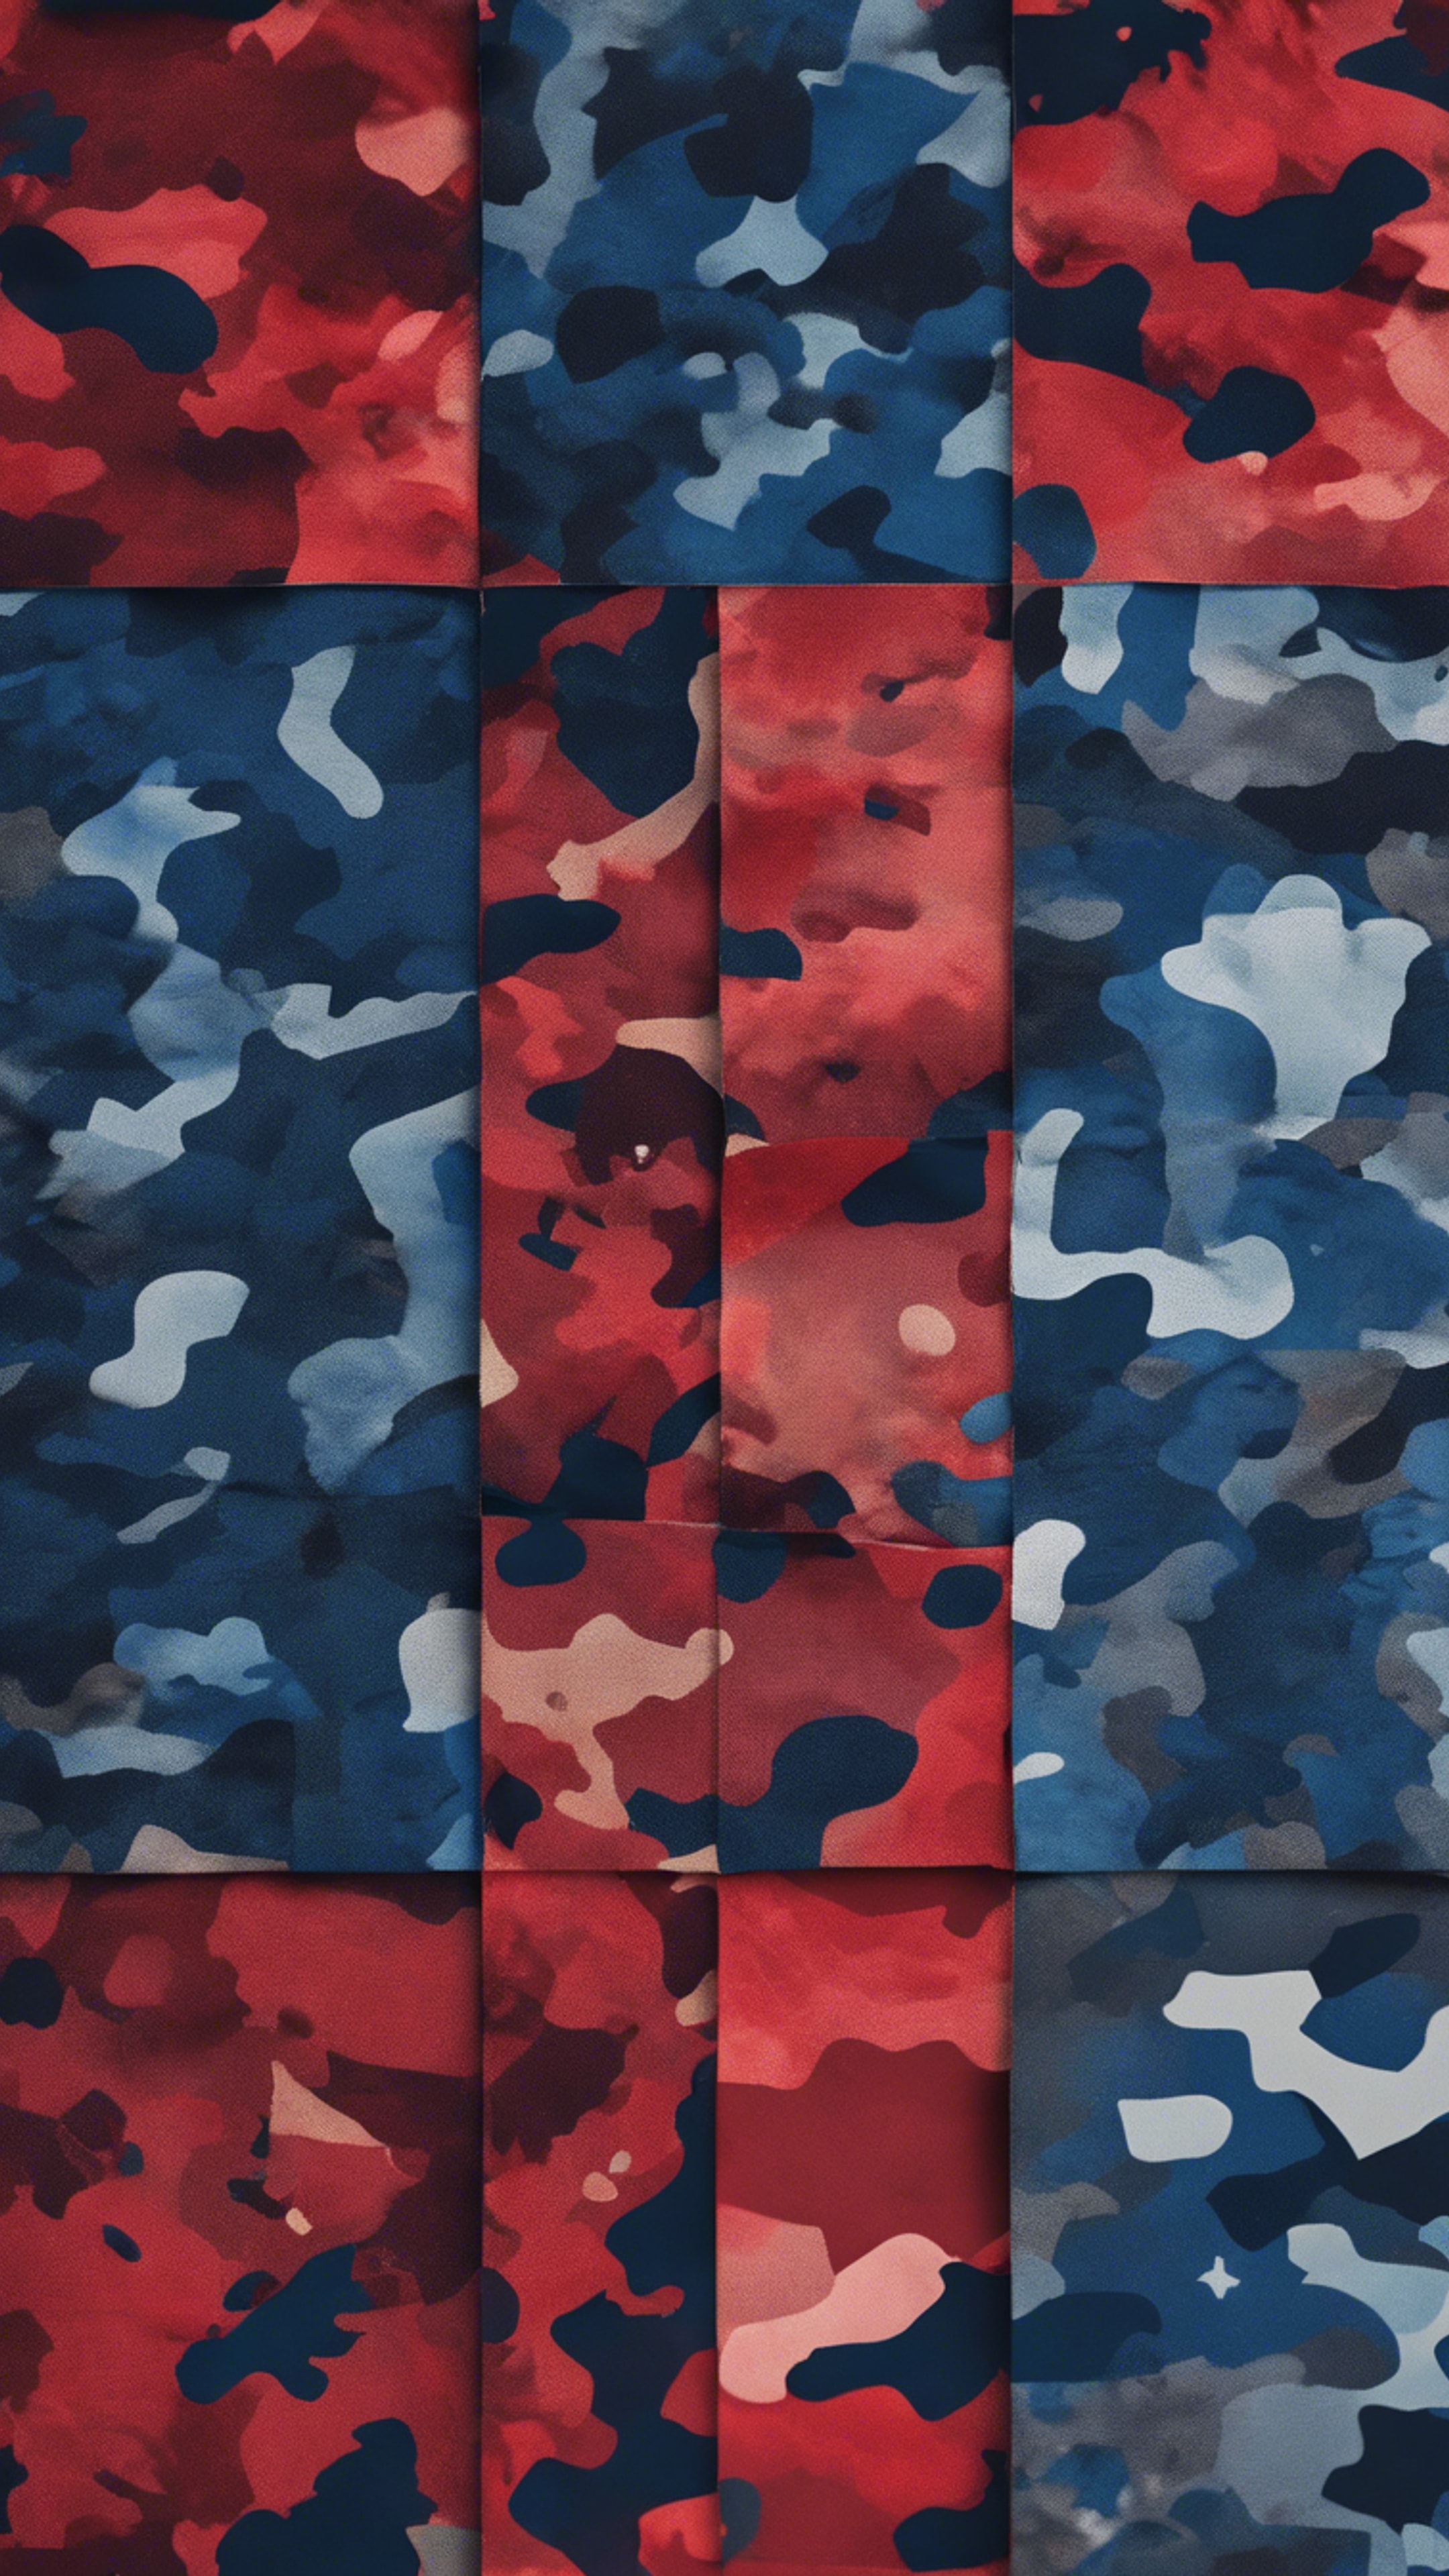 Wide patches of red and blue in a modernized camouflage pattern. Шпалери[bf2d18a8e46c447ea6e3]